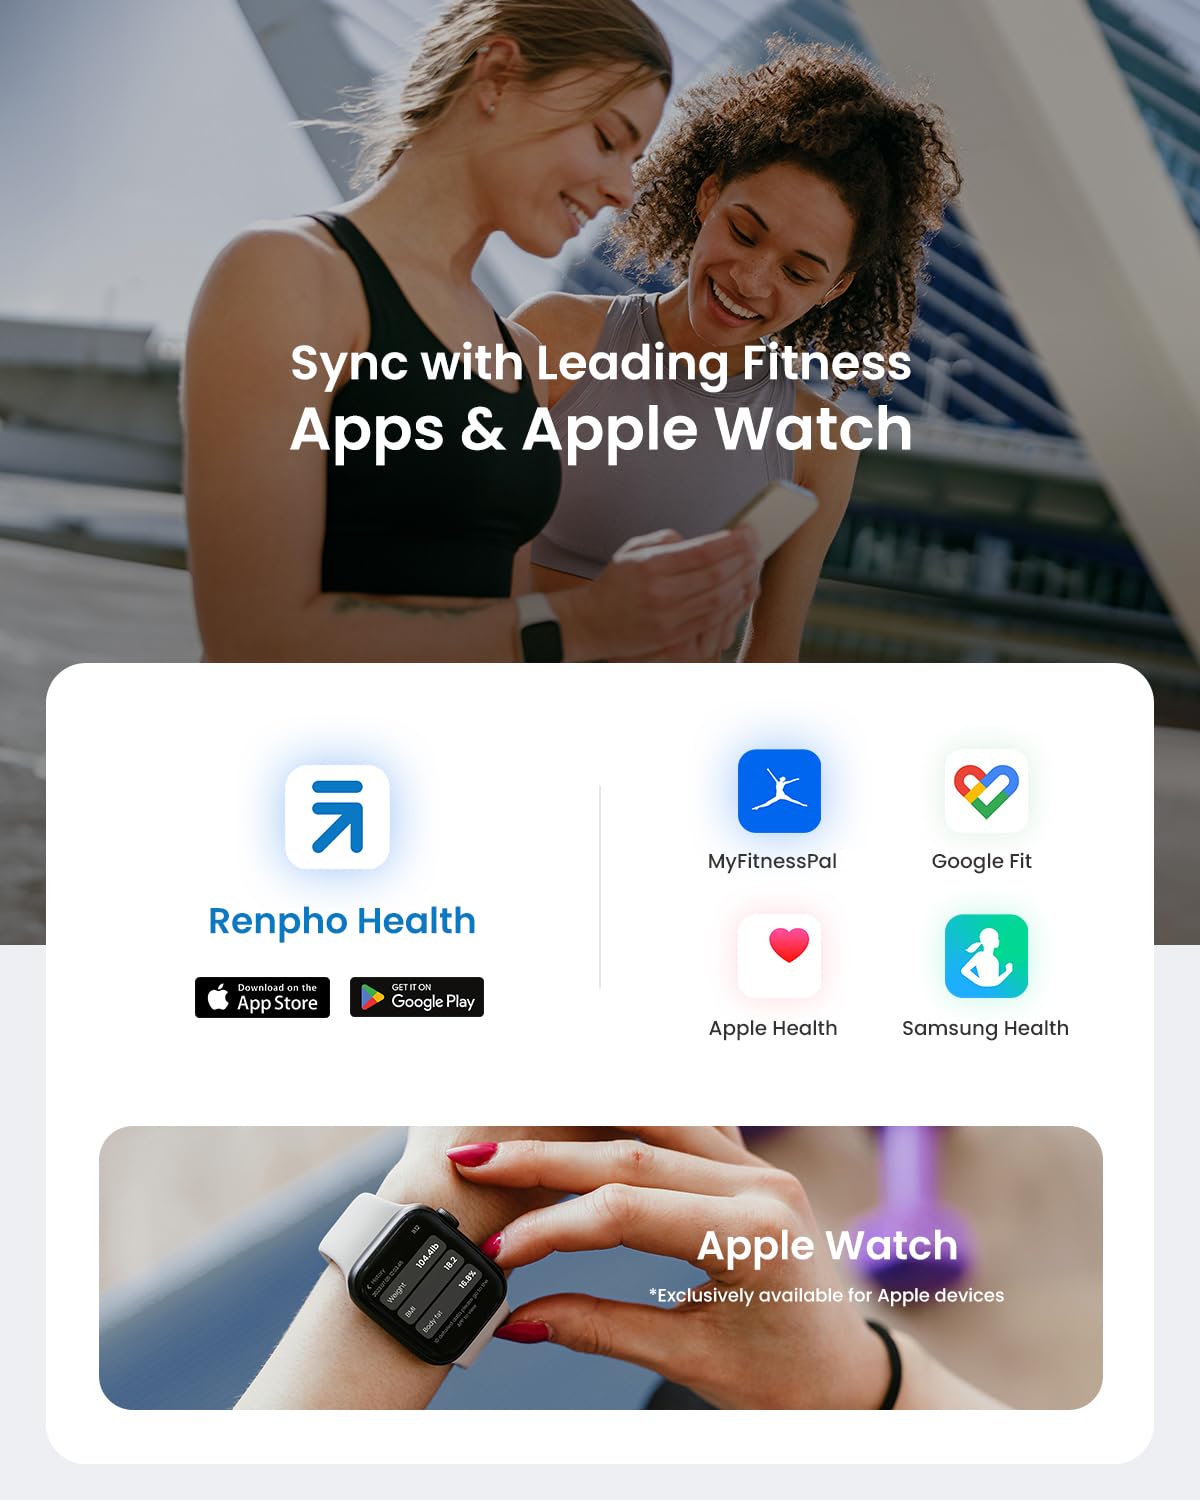 An advertisement showing two women smiling, one reviewing her fitness data on a Renpho Elis 1 Smart Body Scale smartwatch. The text promotes syncing with leading fitness apps and Apple Watch, focusing on body composition analysis. Icons for the App Store